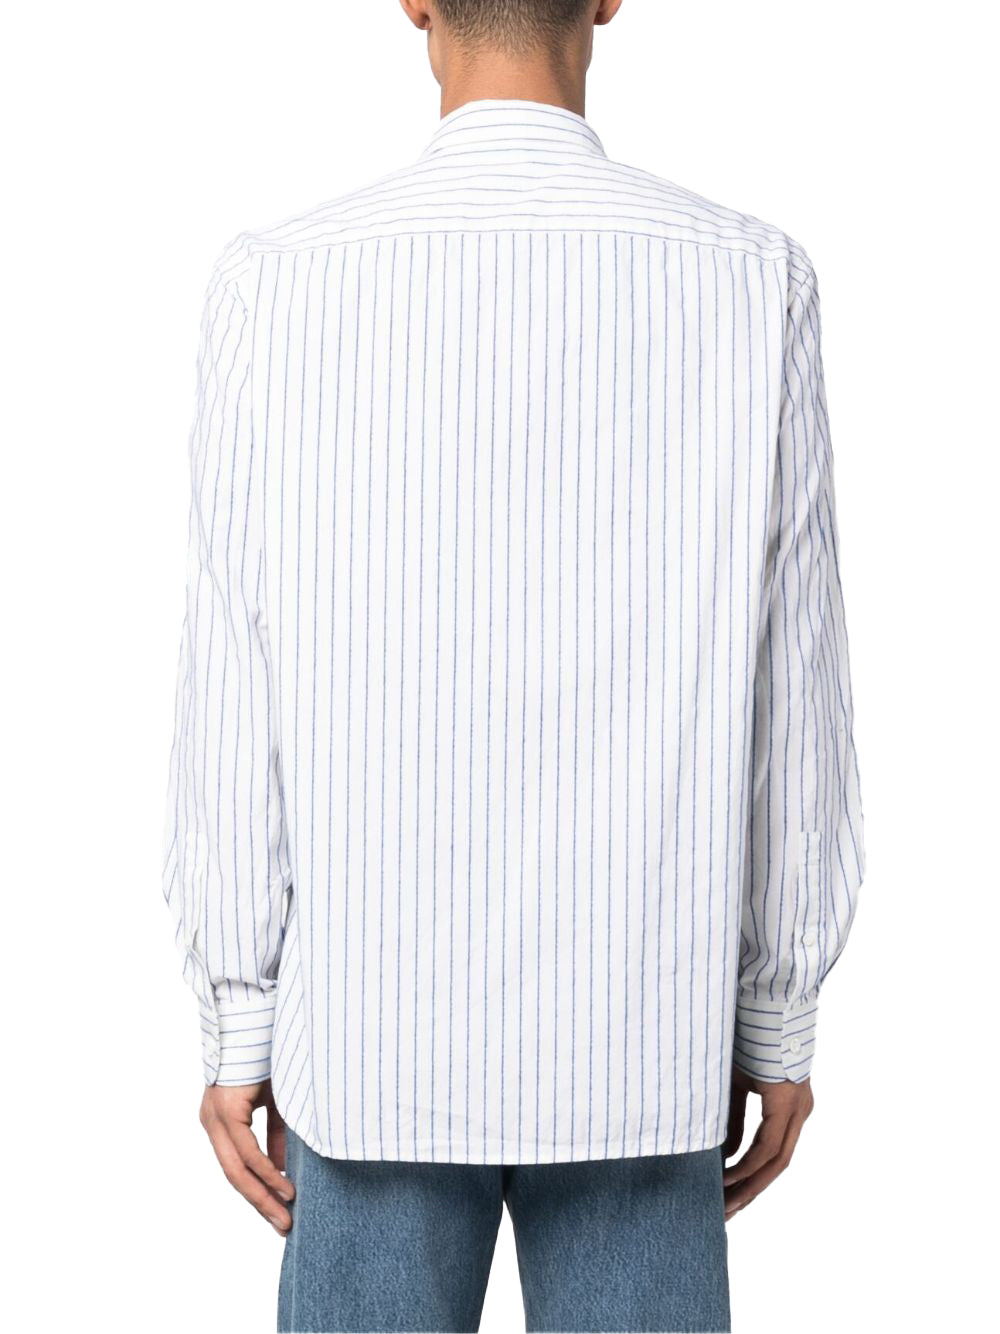 Spacey SS striped shirt